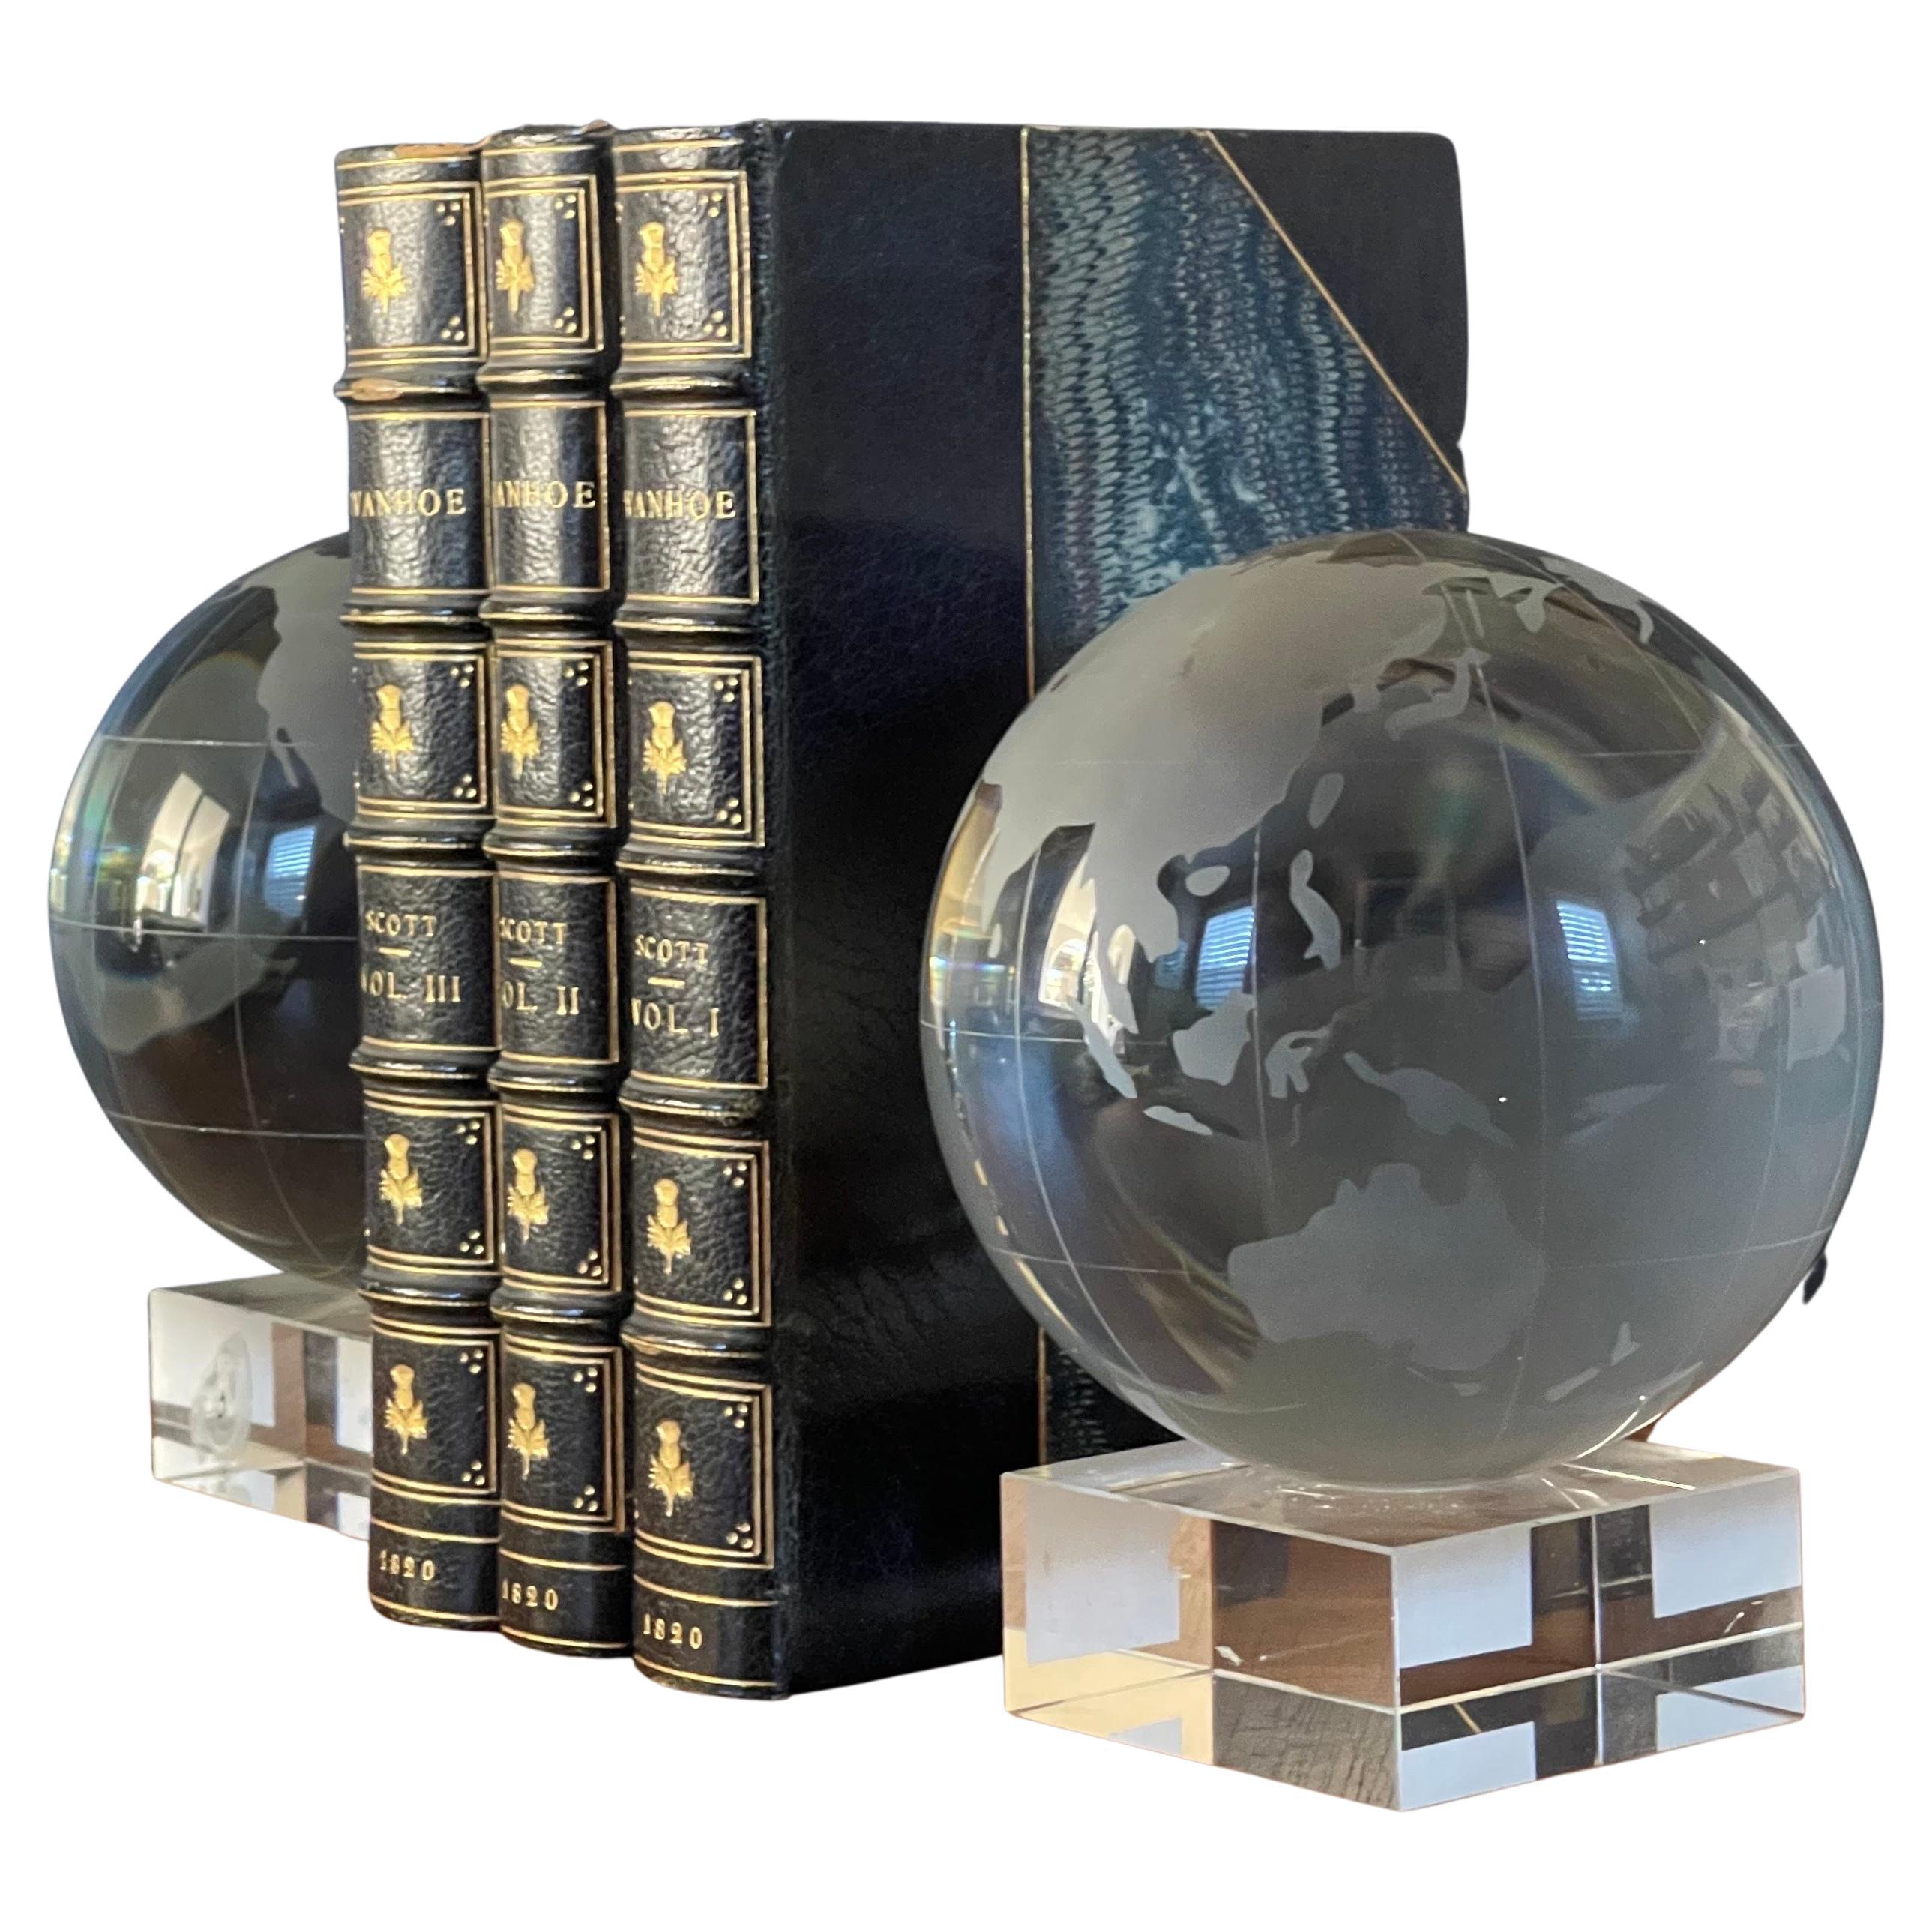 Substantial pair of etched crystal globe bookends by Nicole Miller, circa 2000s. The bookends are in very good vintage condition with no chips or cracks and measure 9.5